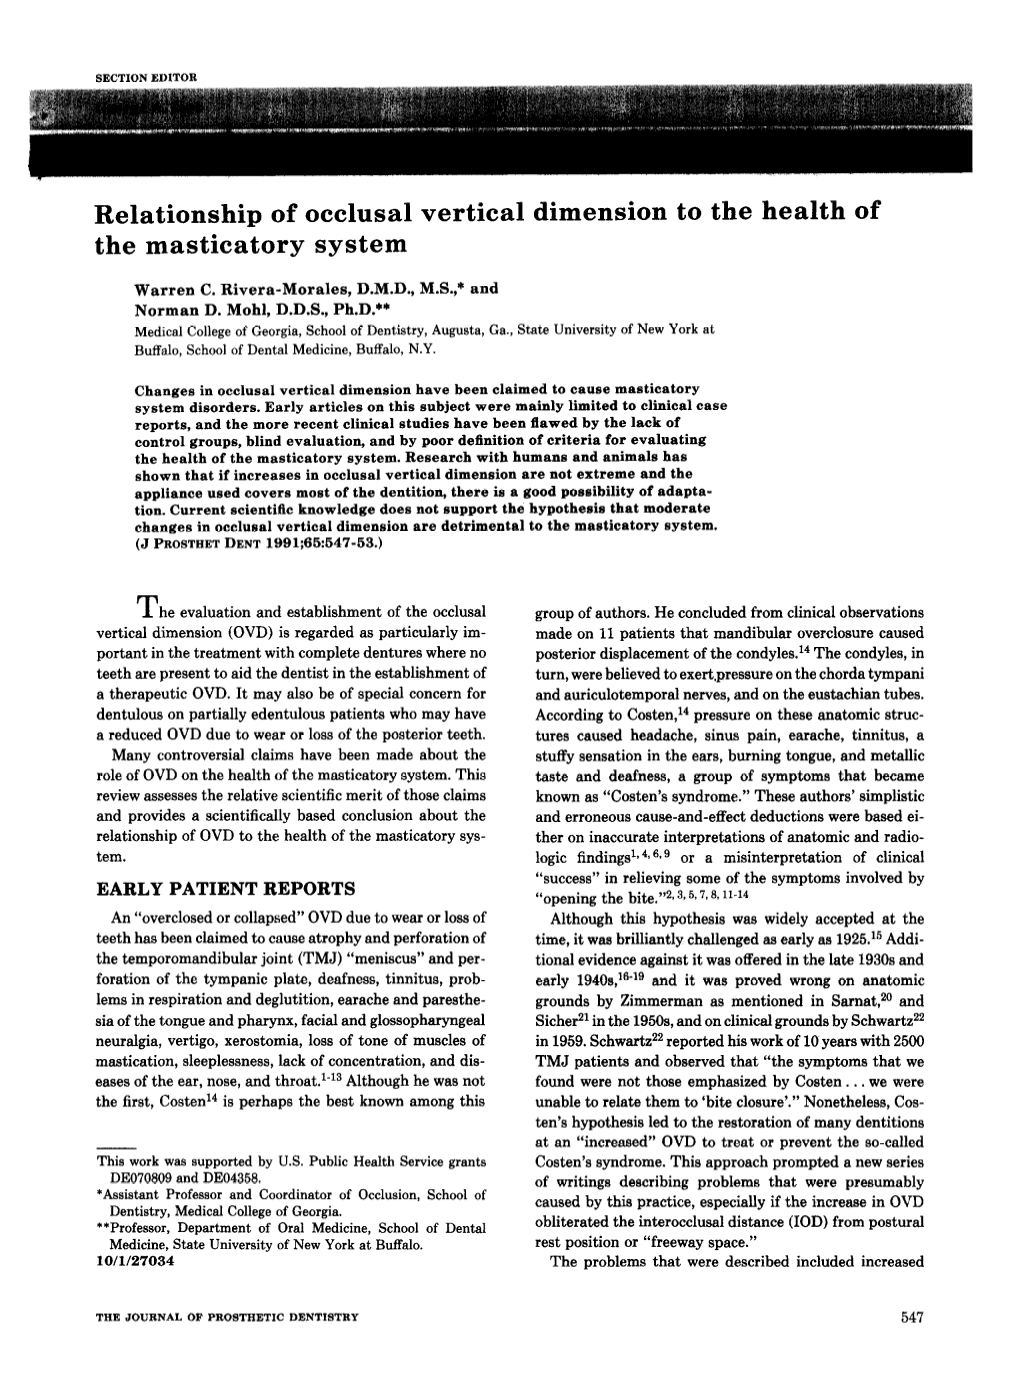 Relationship of Occlusal Vertical Dimension to the Health of the Masticatory System